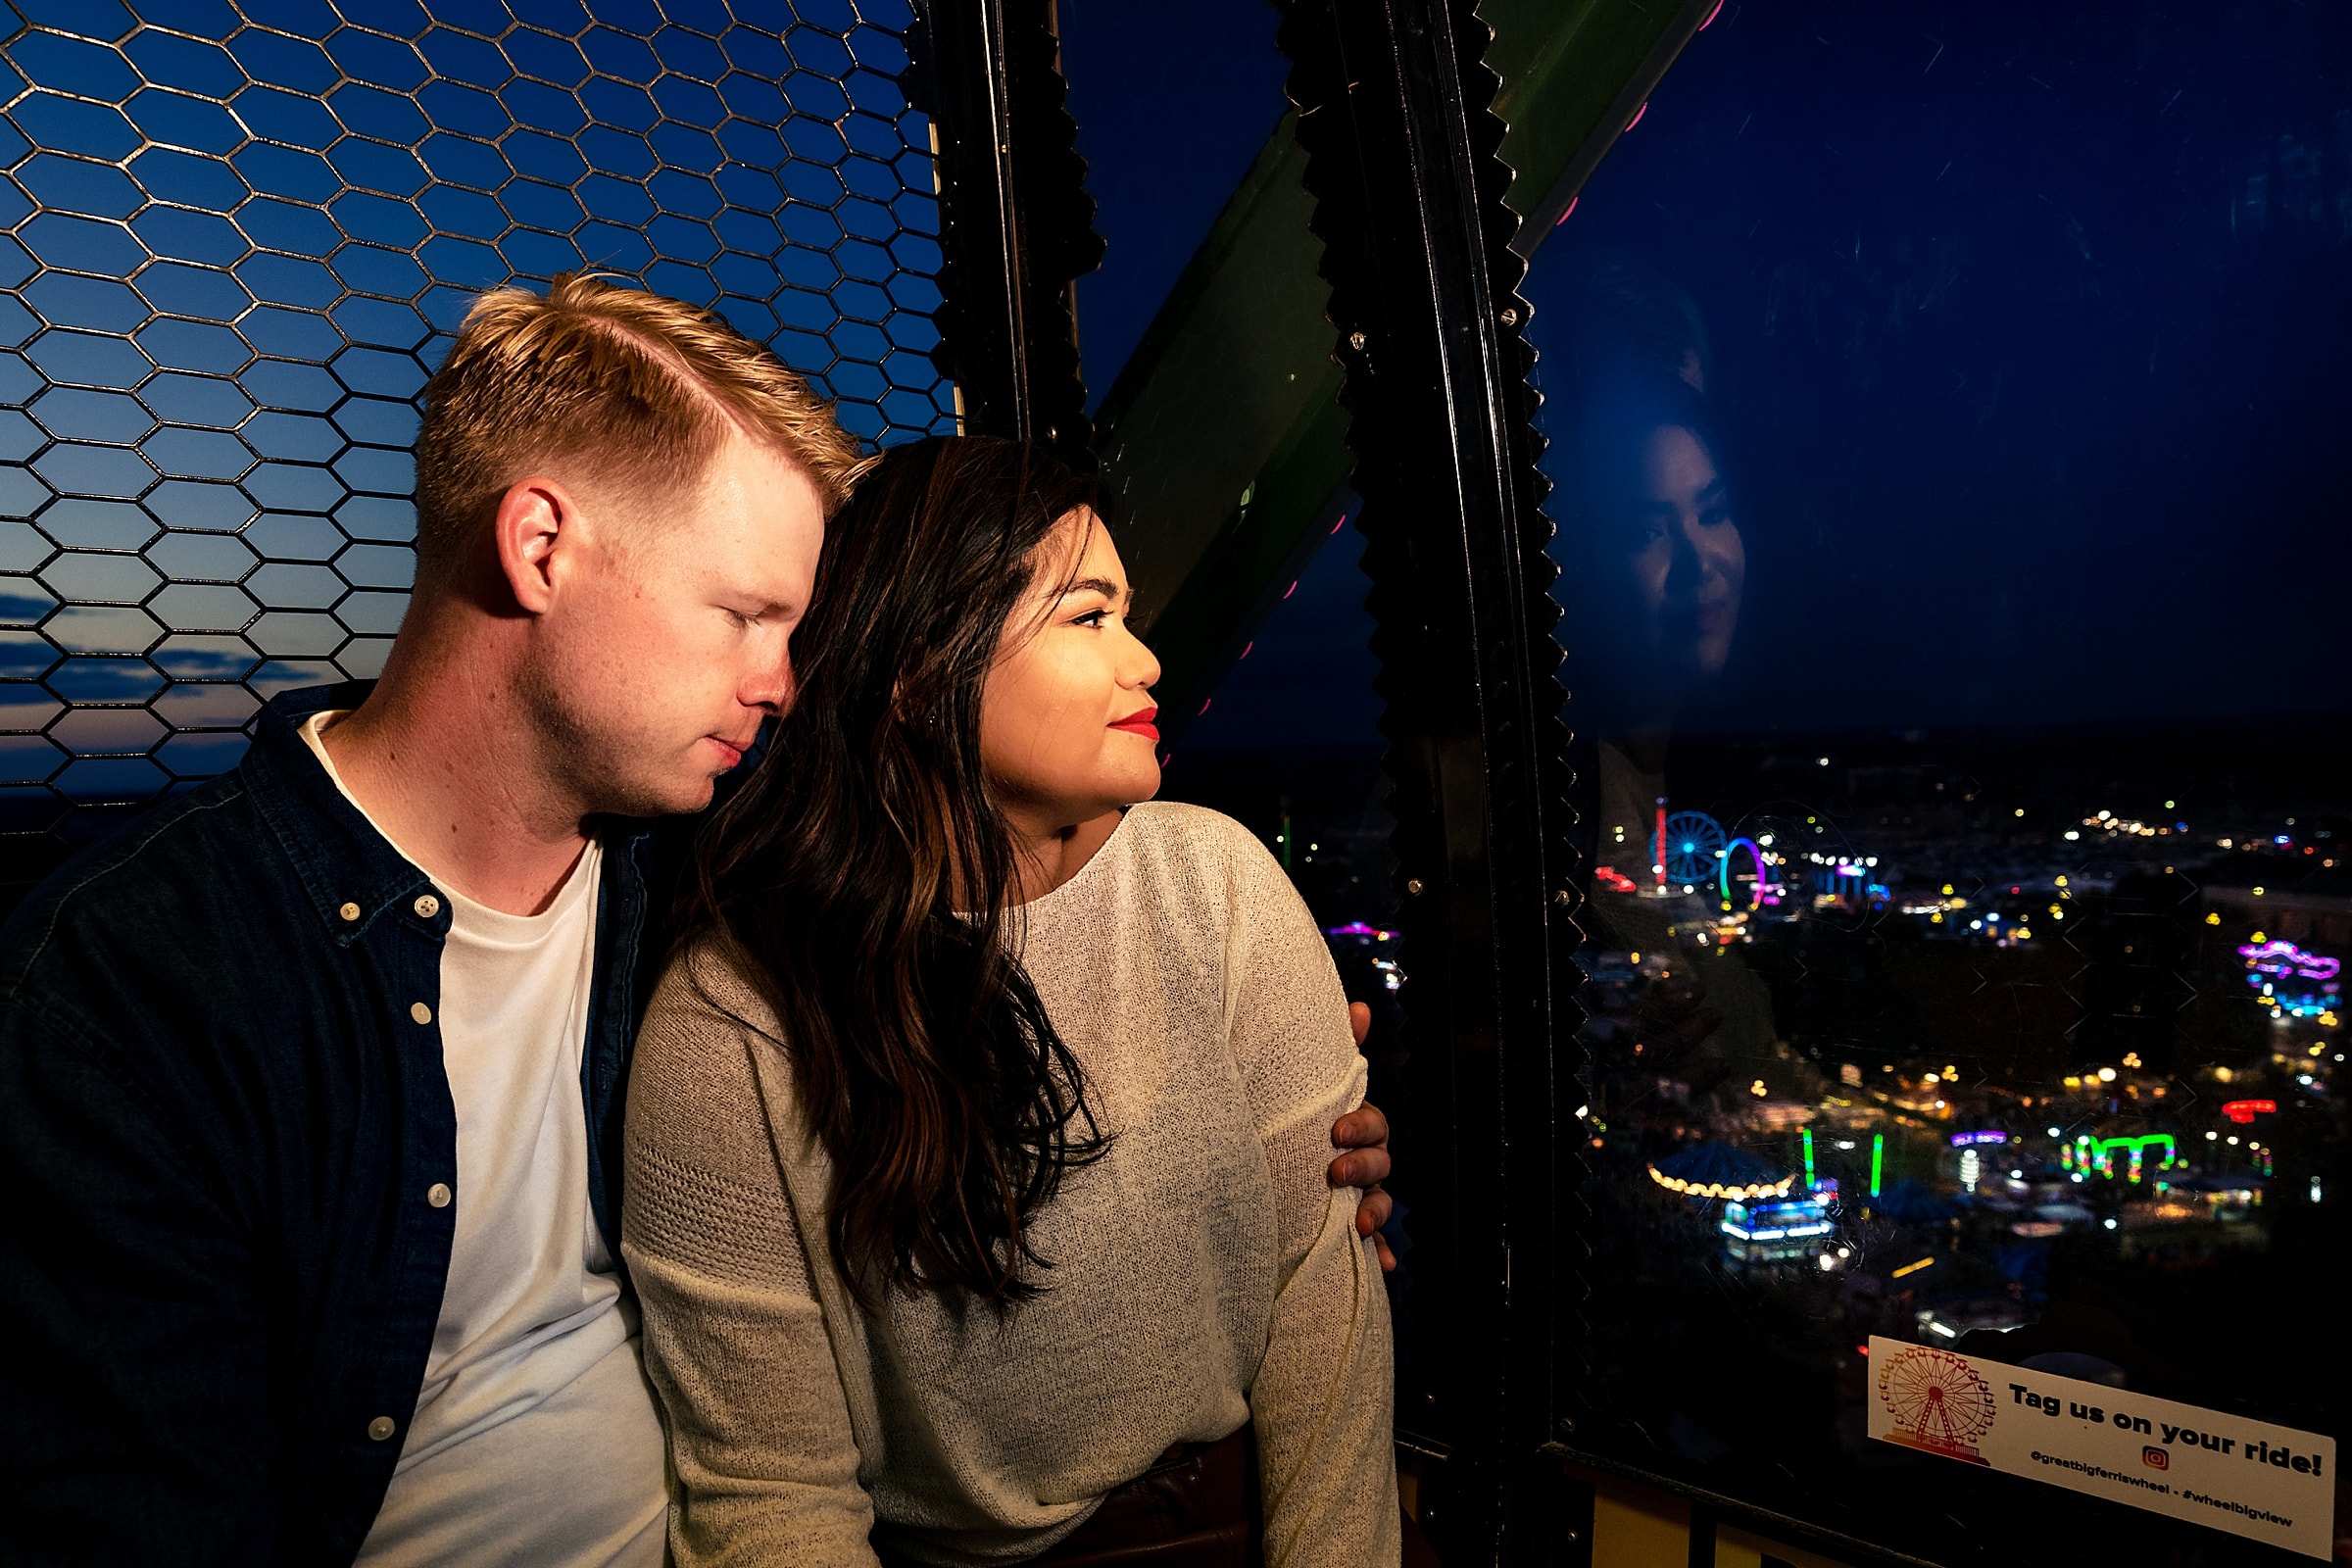 NC State Fair Engagement photos are some of the most fun - you can get on the ferris wheel